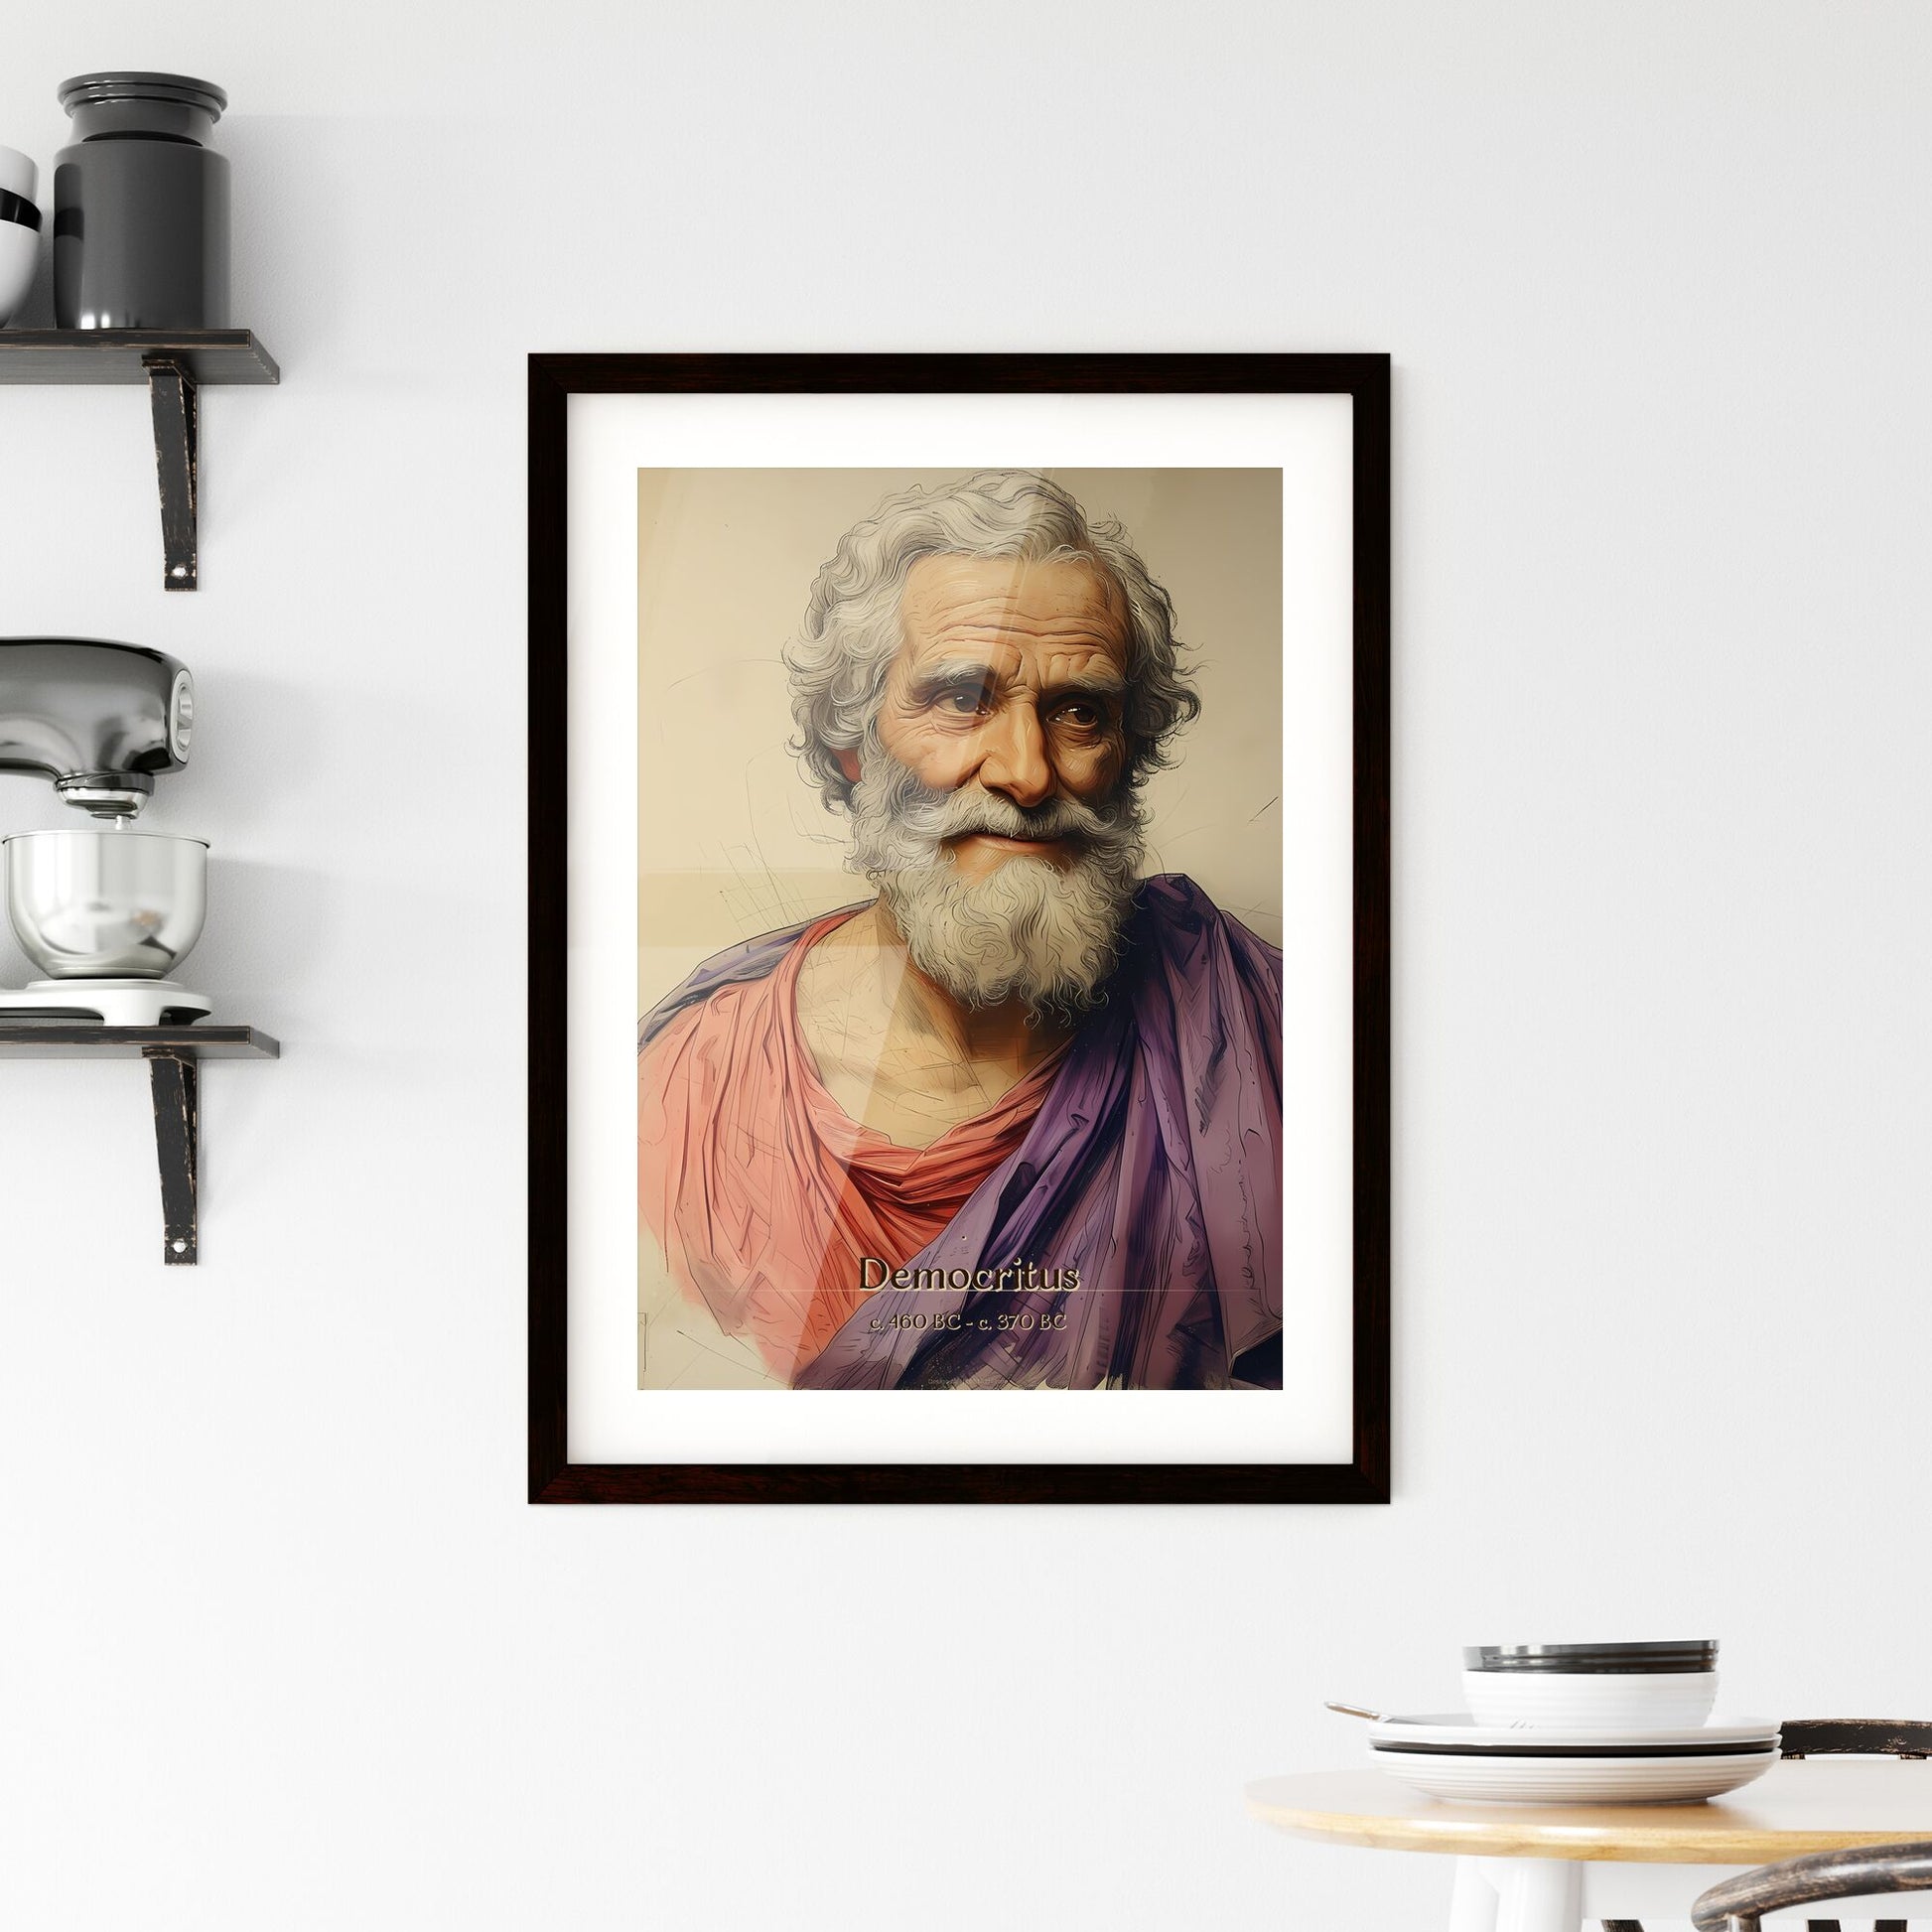 Democritus, c. 460 BC - c. 370 BC, A Poster of a man with a beard and a purple robe Default Title